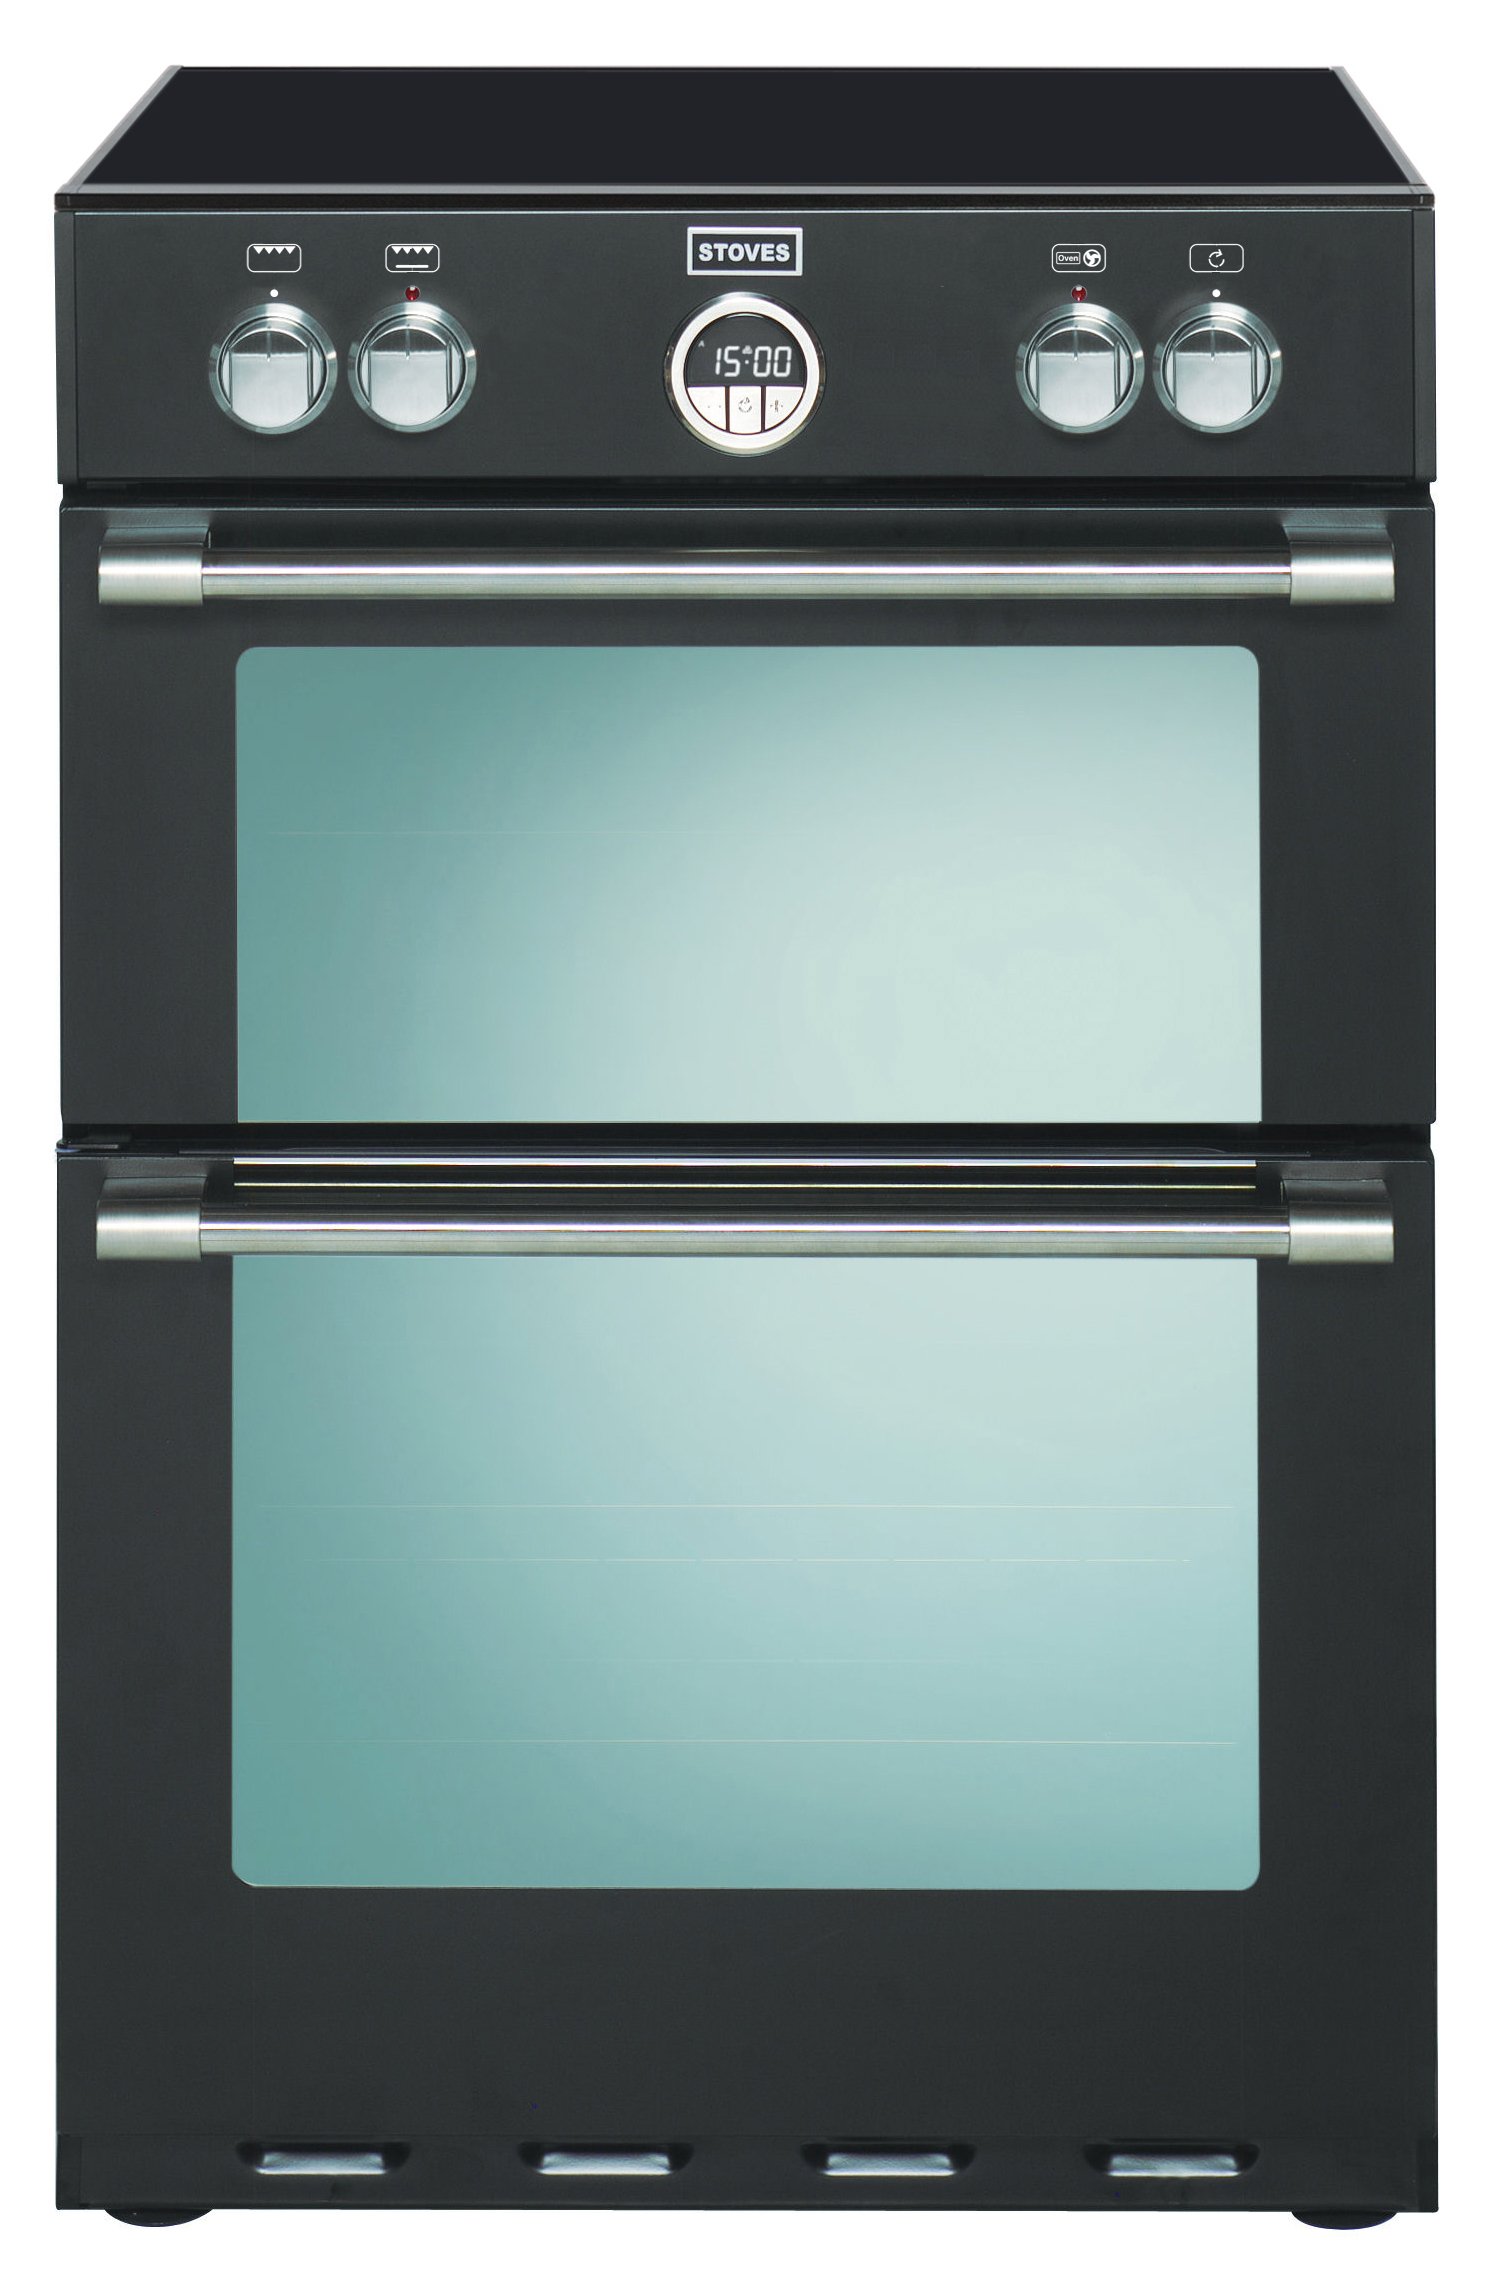 60cm Electric Range Cooker With A 4 Zone Electric Induction Hob, Conventional Oven & Grill and Multifunction Main Oven